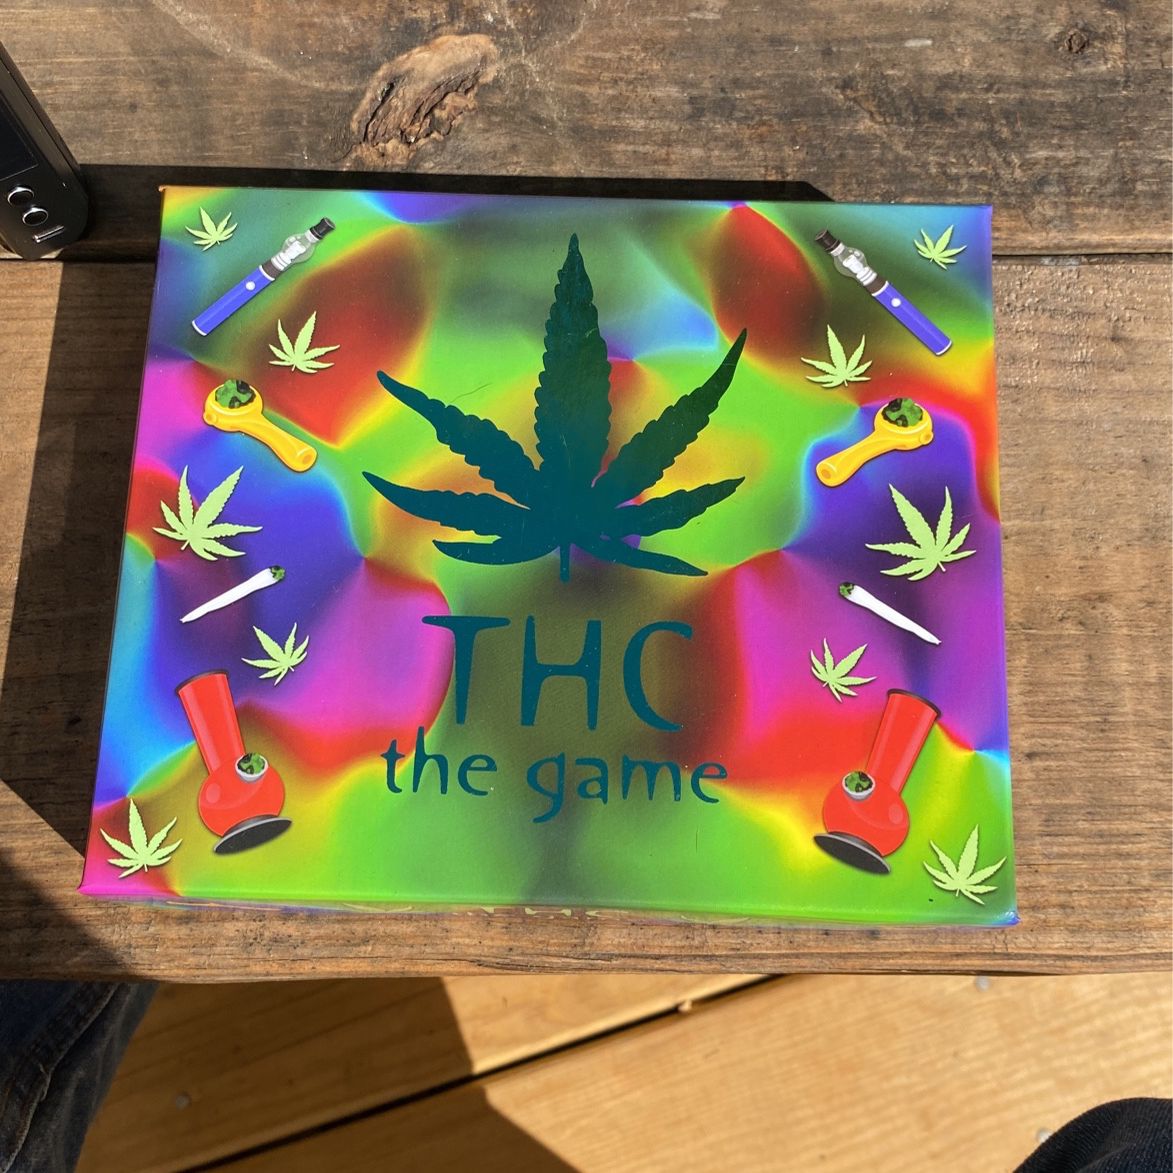 Thc the game 